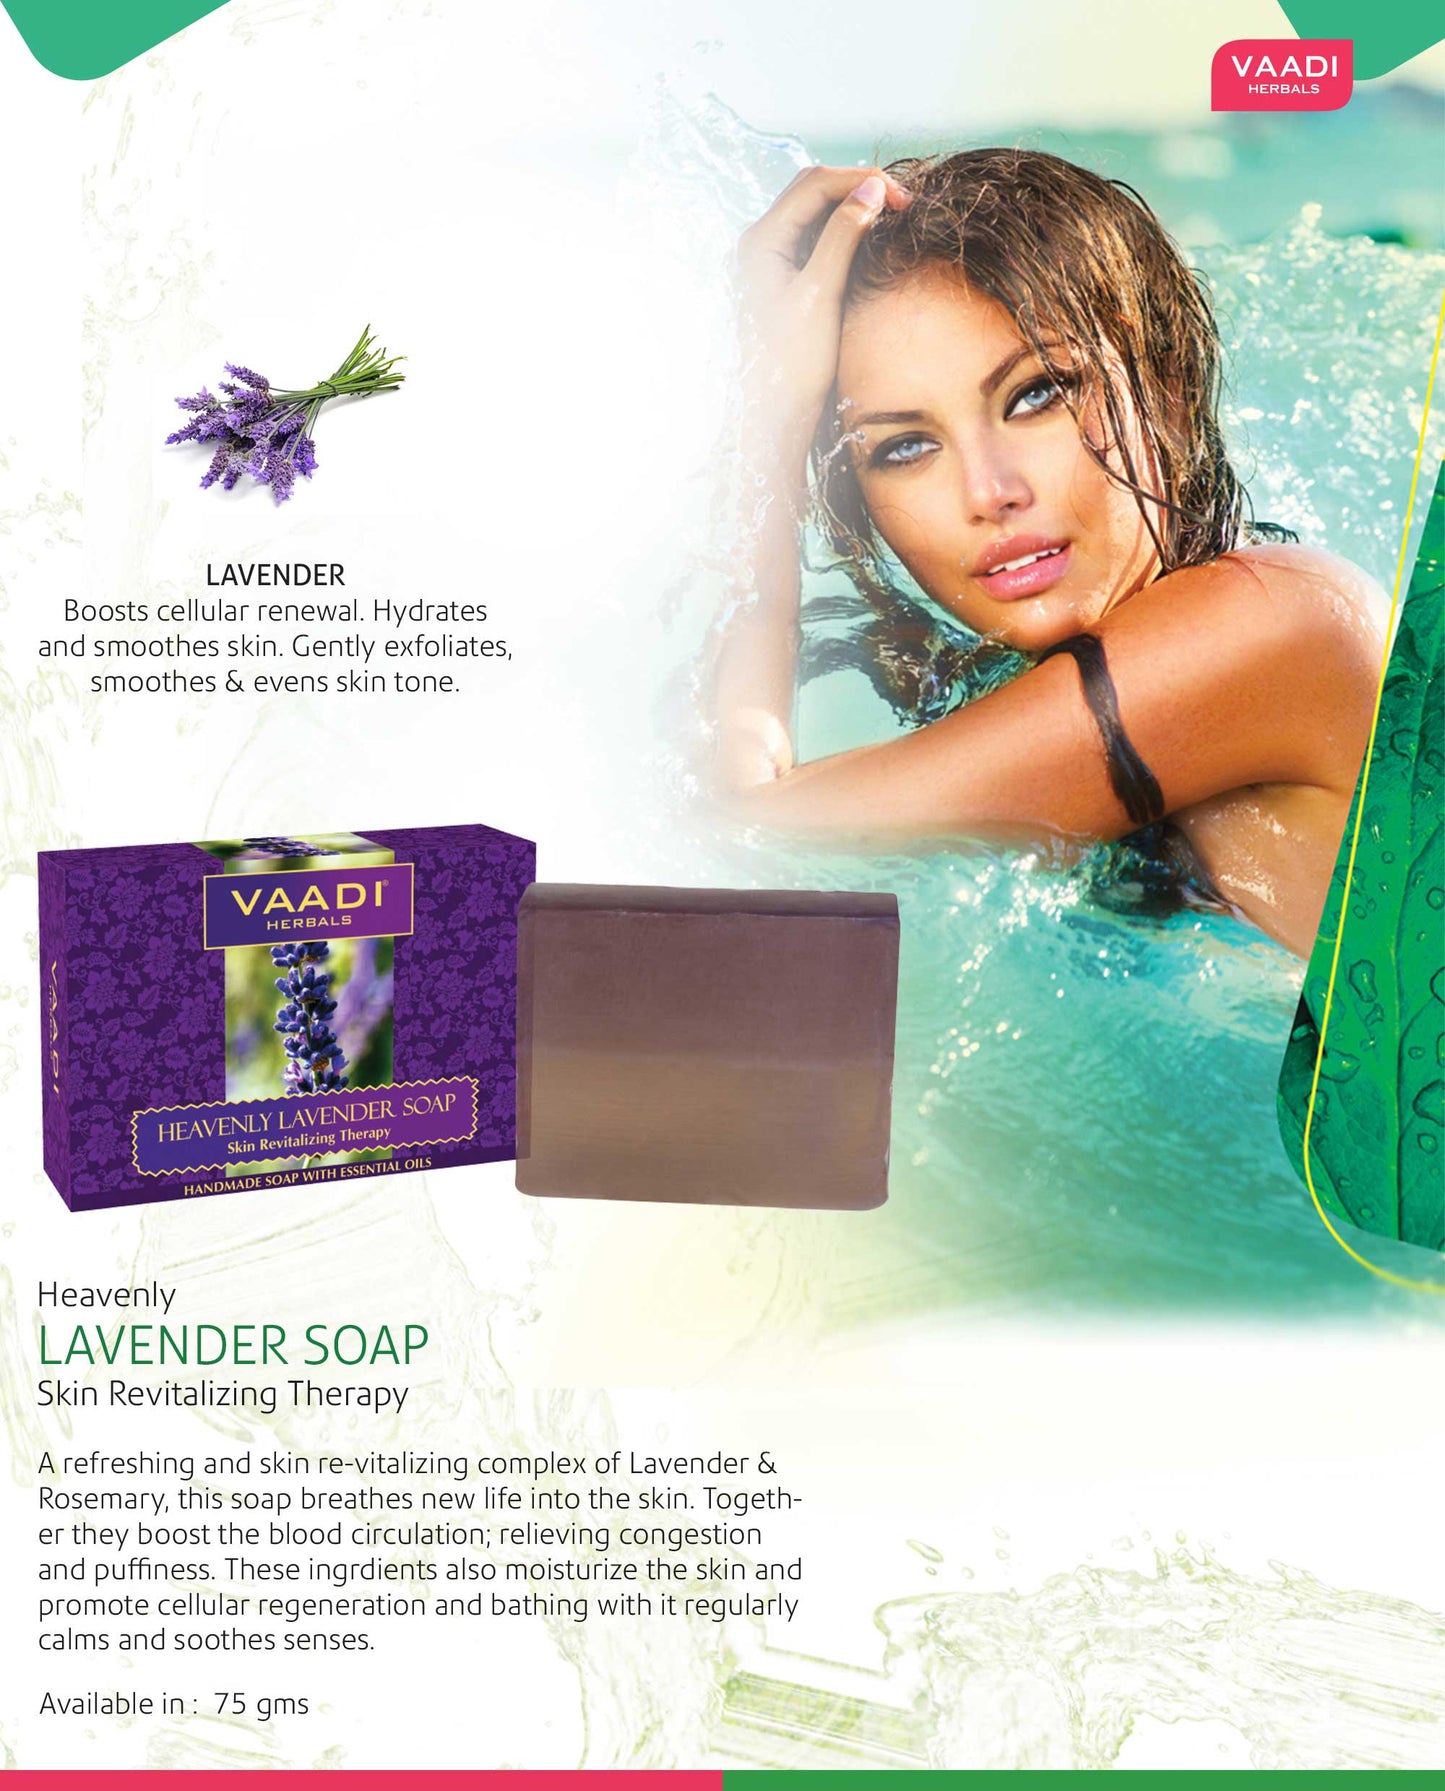 Heavenly Organic Lavender Soap with Rosemary - Revitalizes & Hydrates Skin ( 75 gms / 2.7 oz)